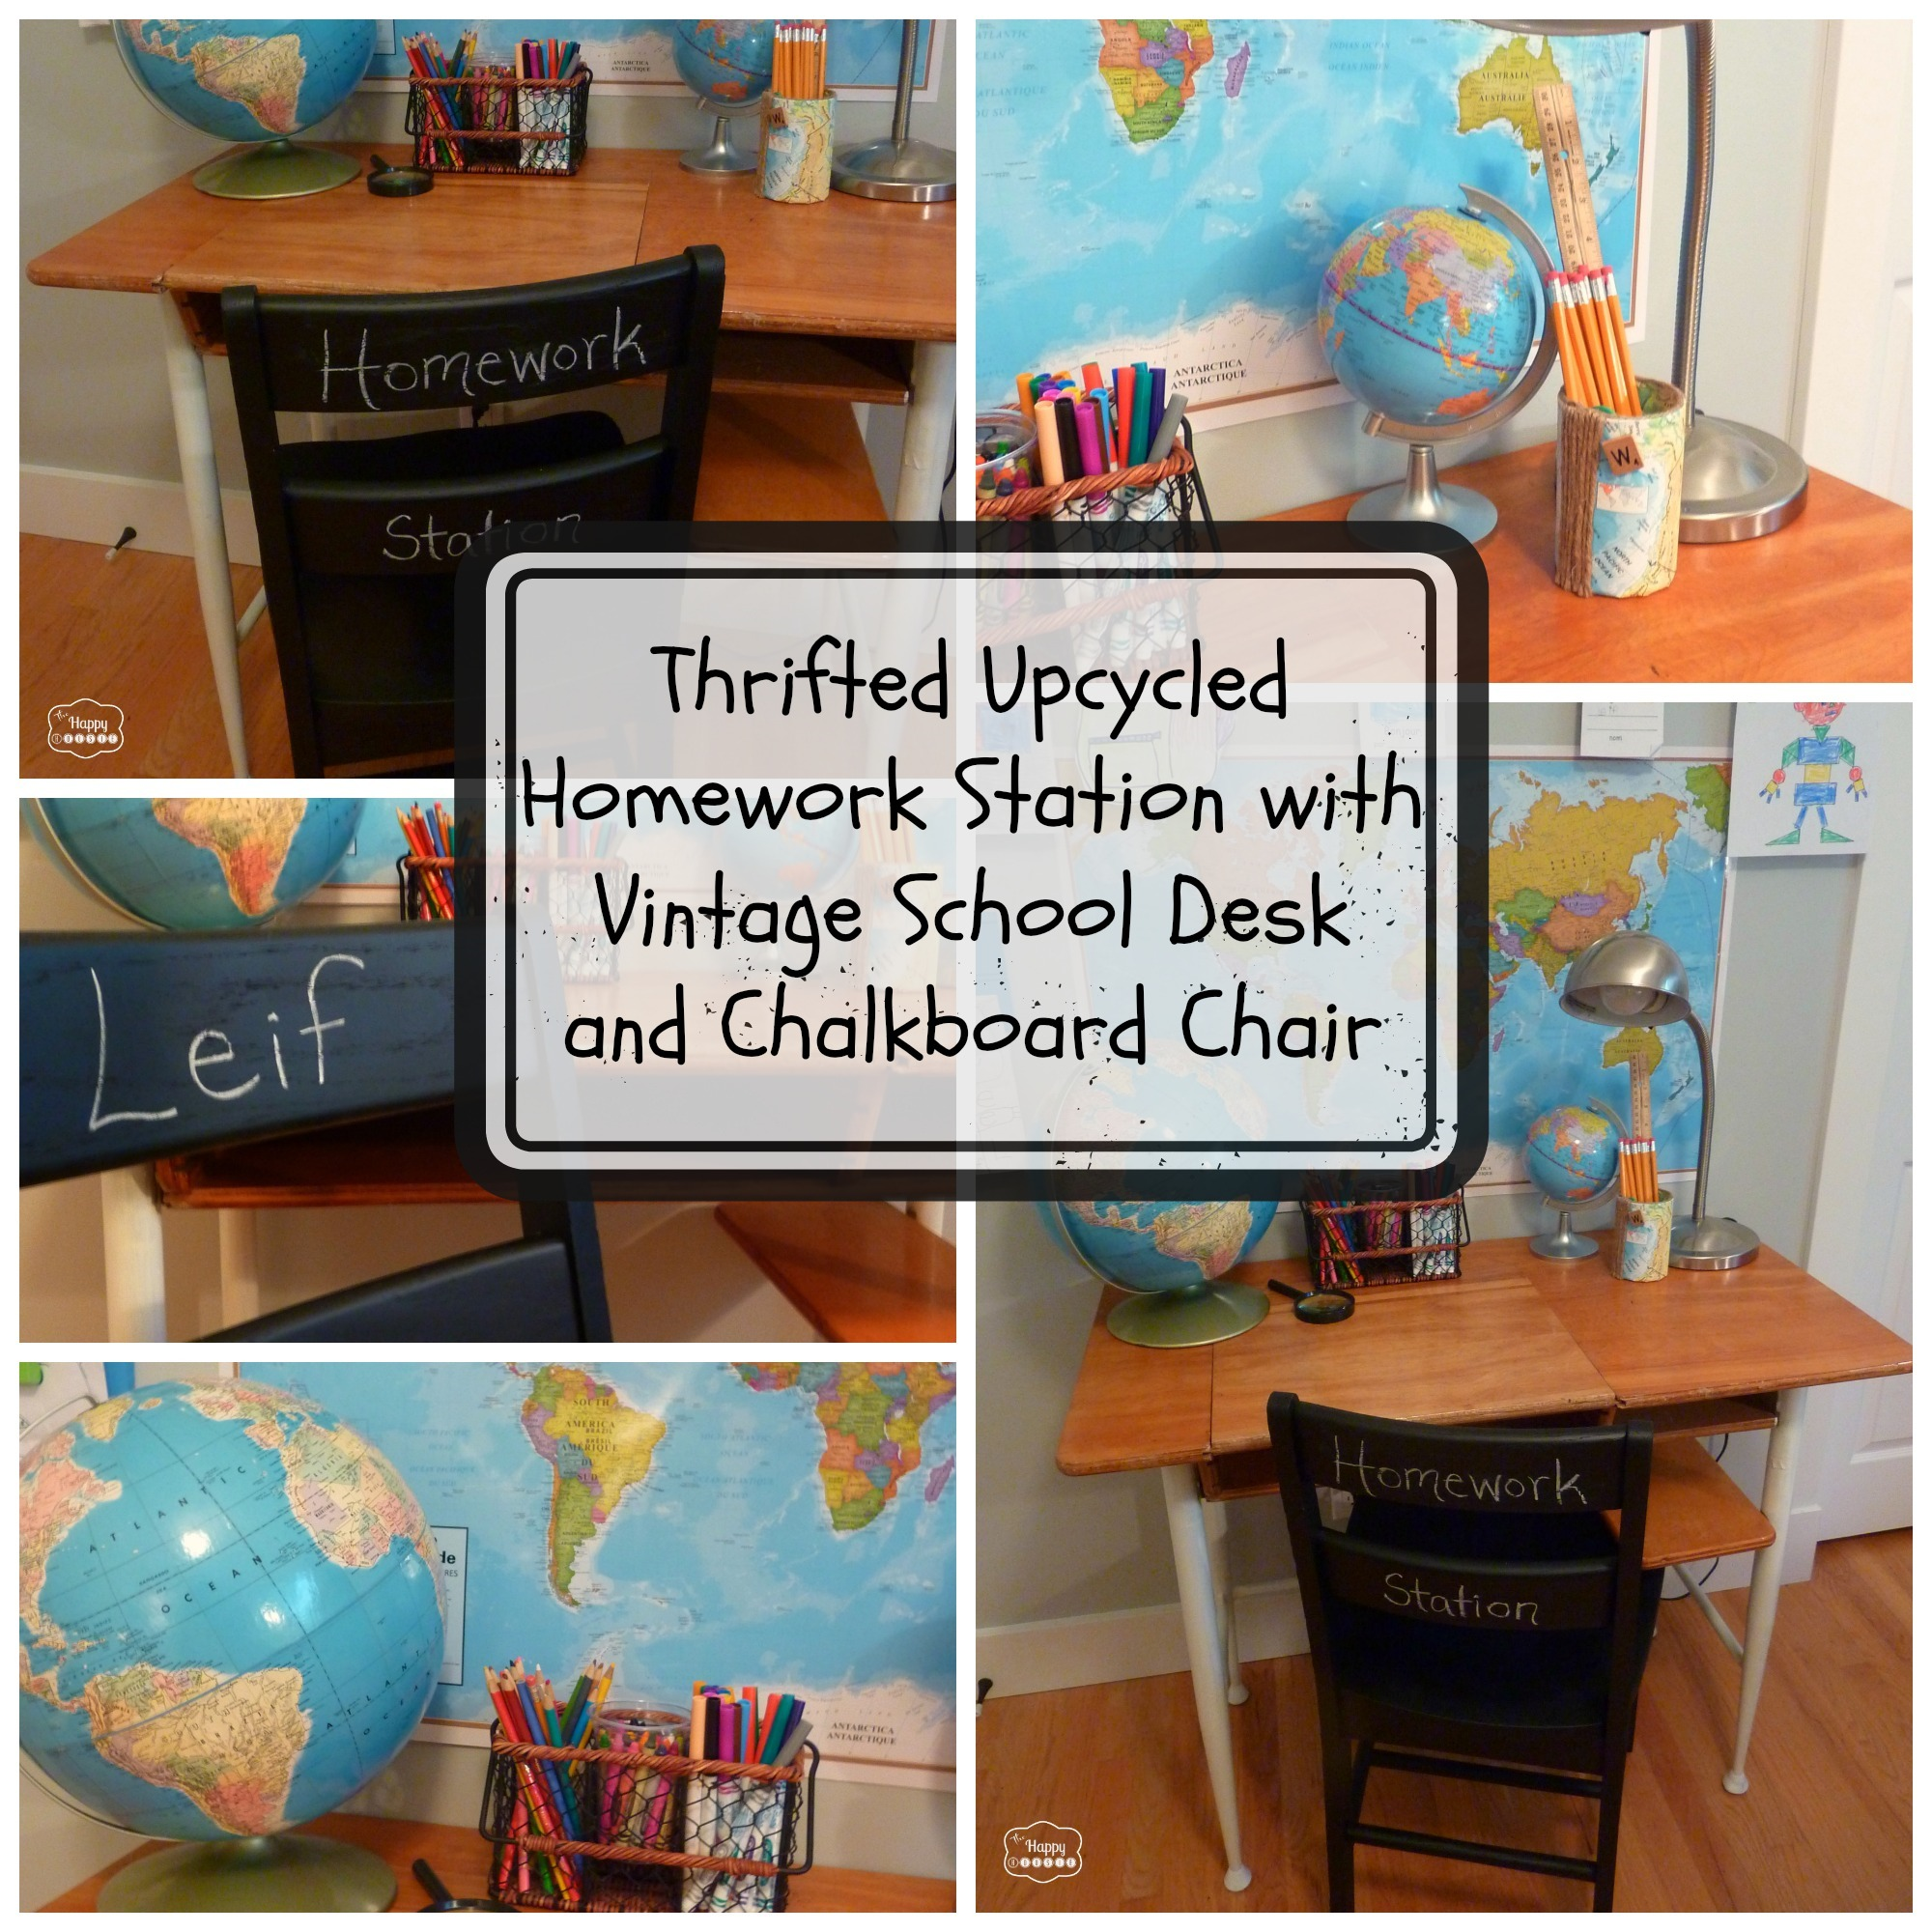 Thrifted Upcycled Homework Station with a Vintage School Desk and Faux Chalkboard Chair